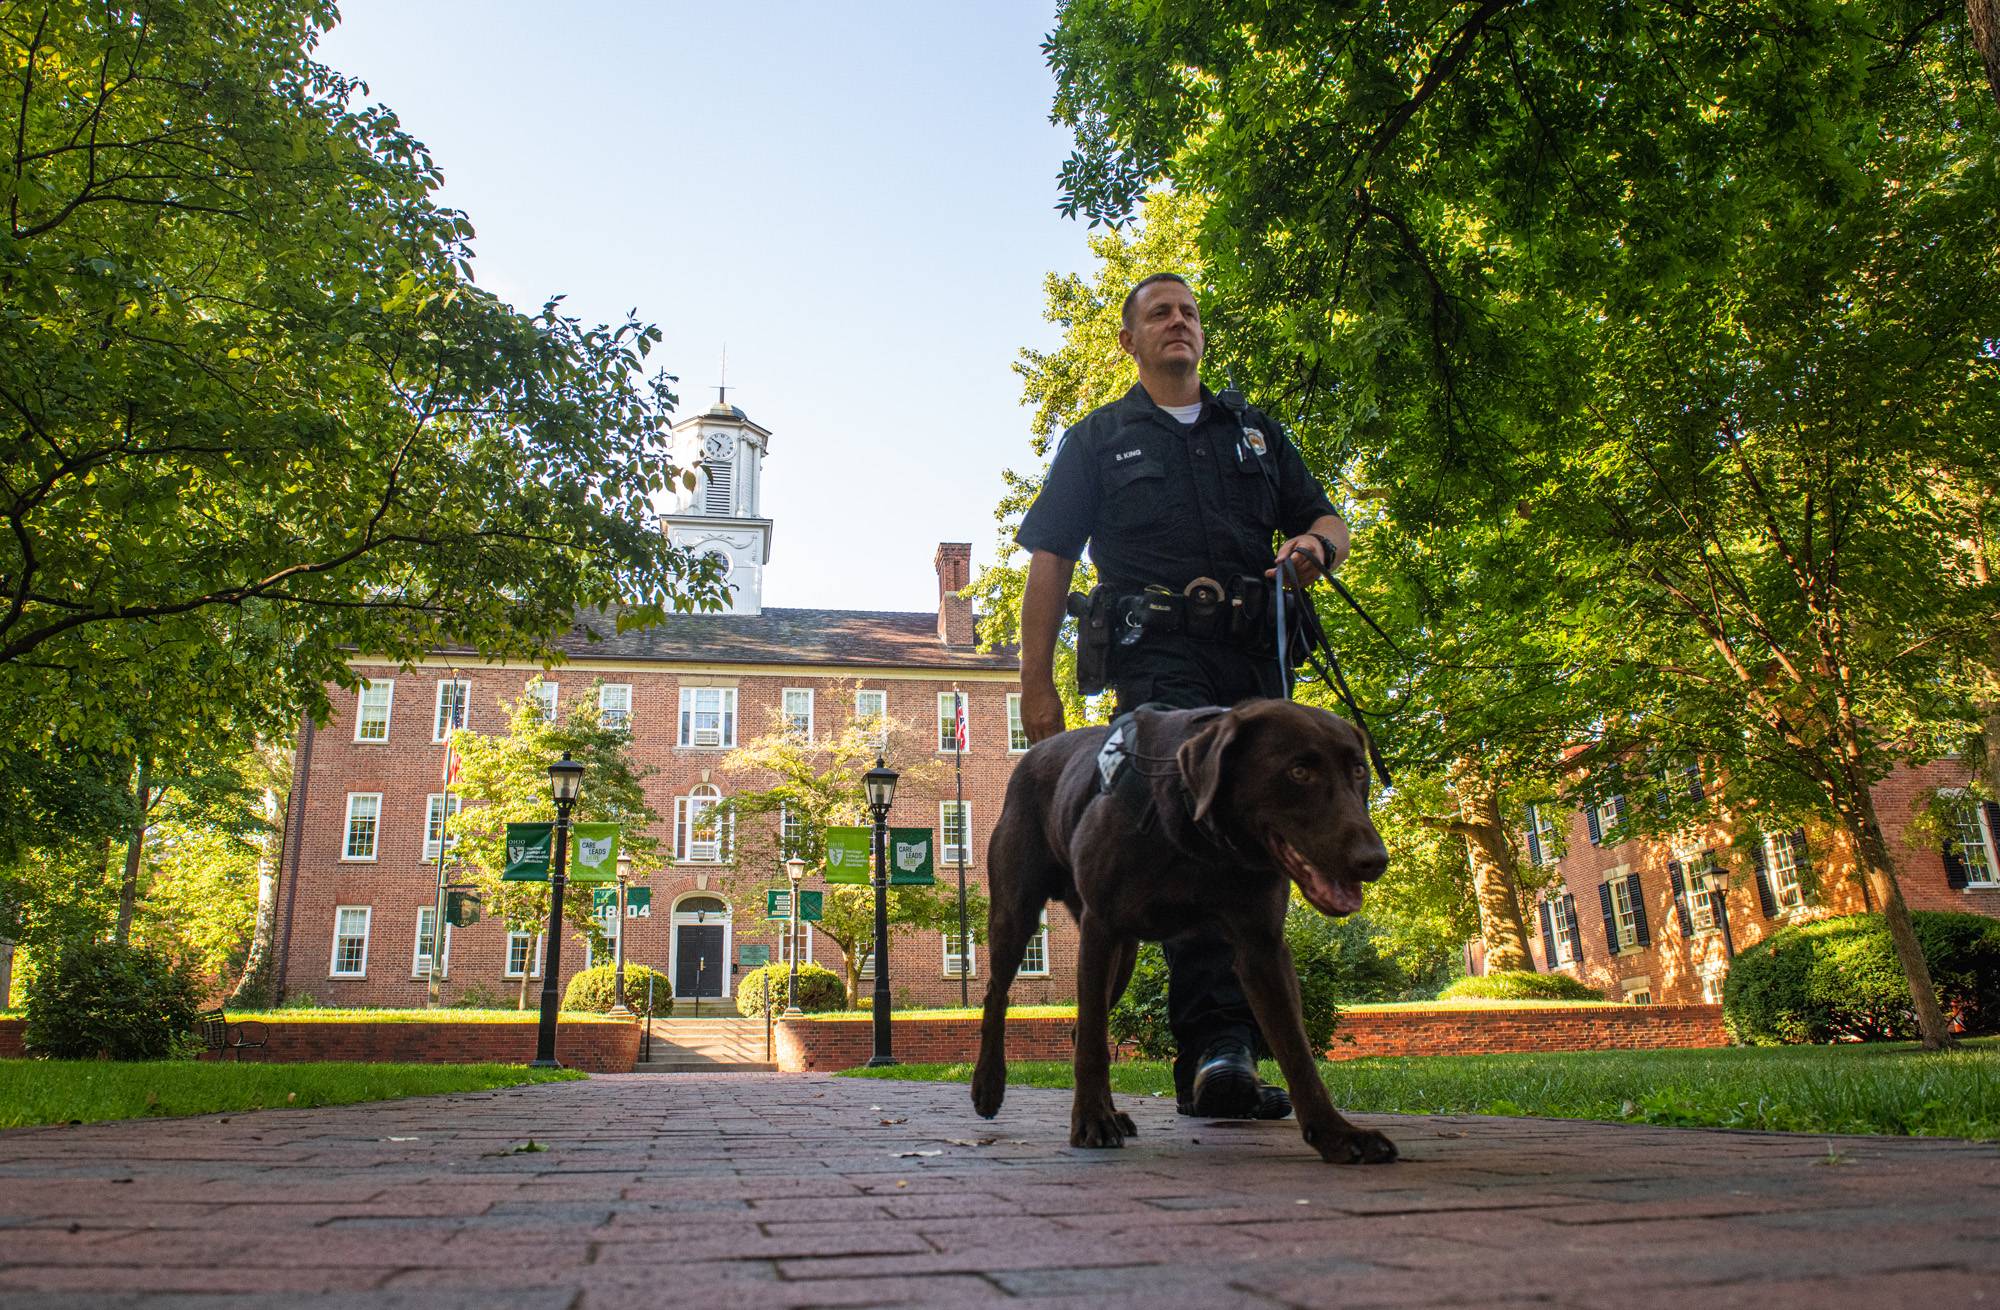 Bach and his handler, Officer Brandon King, walk across College Green. While King has served over 20 years at the University, Bach is his first K9 partner.